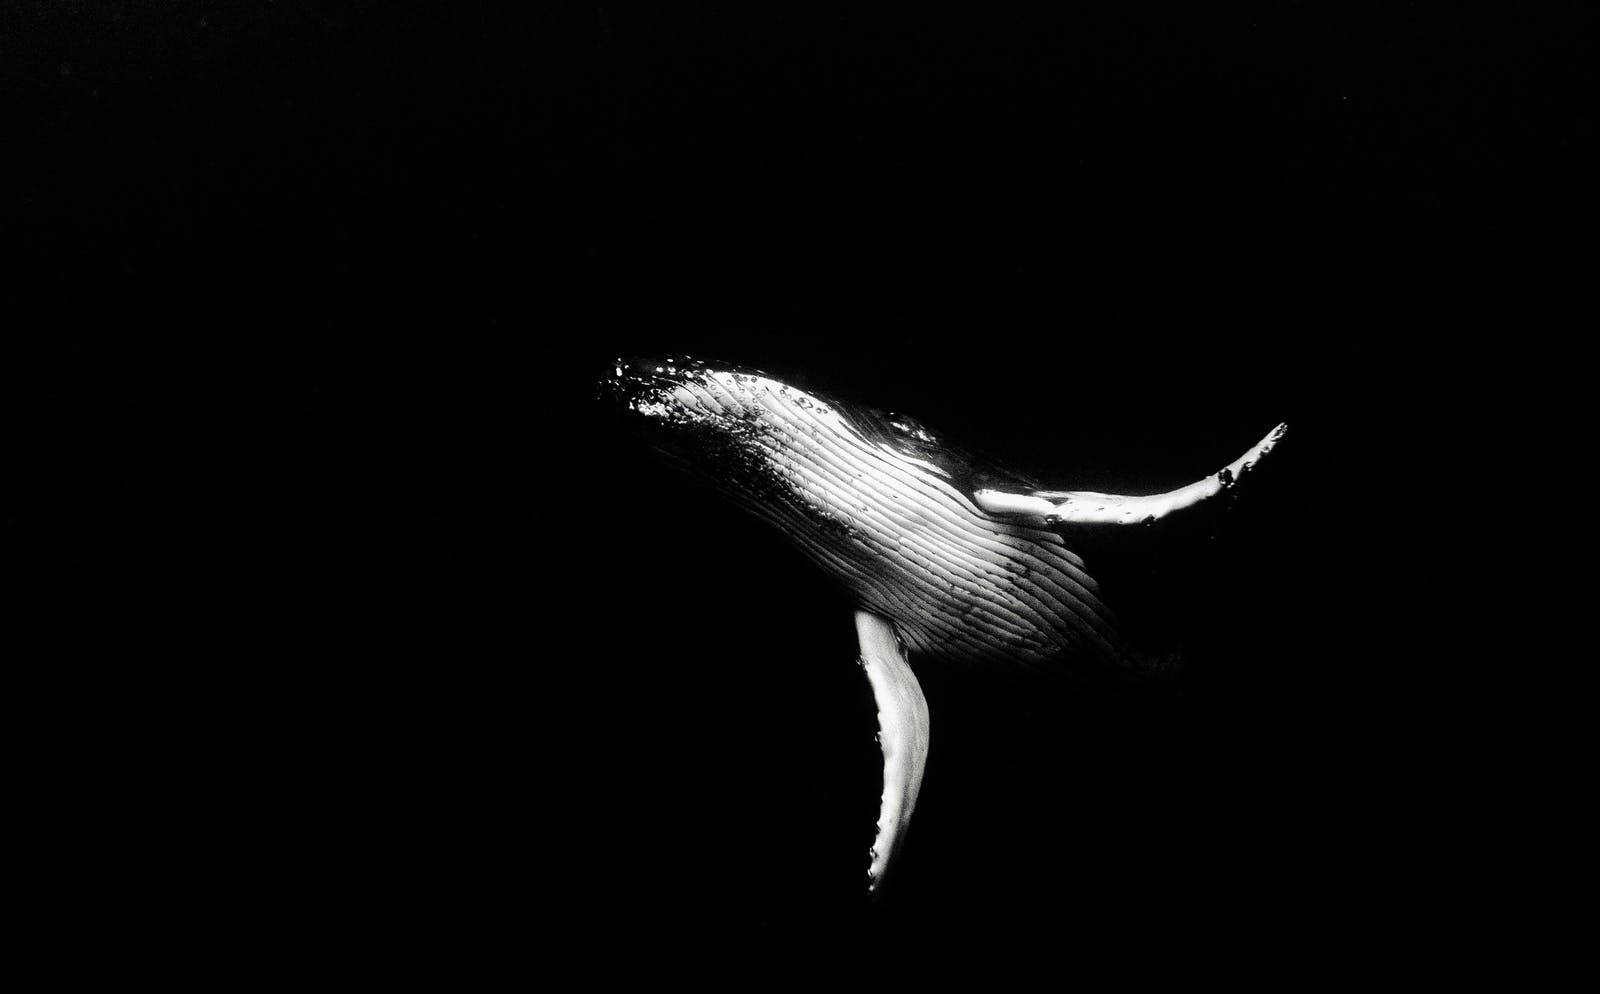 4k Black And White Fin Whale Wallpaper